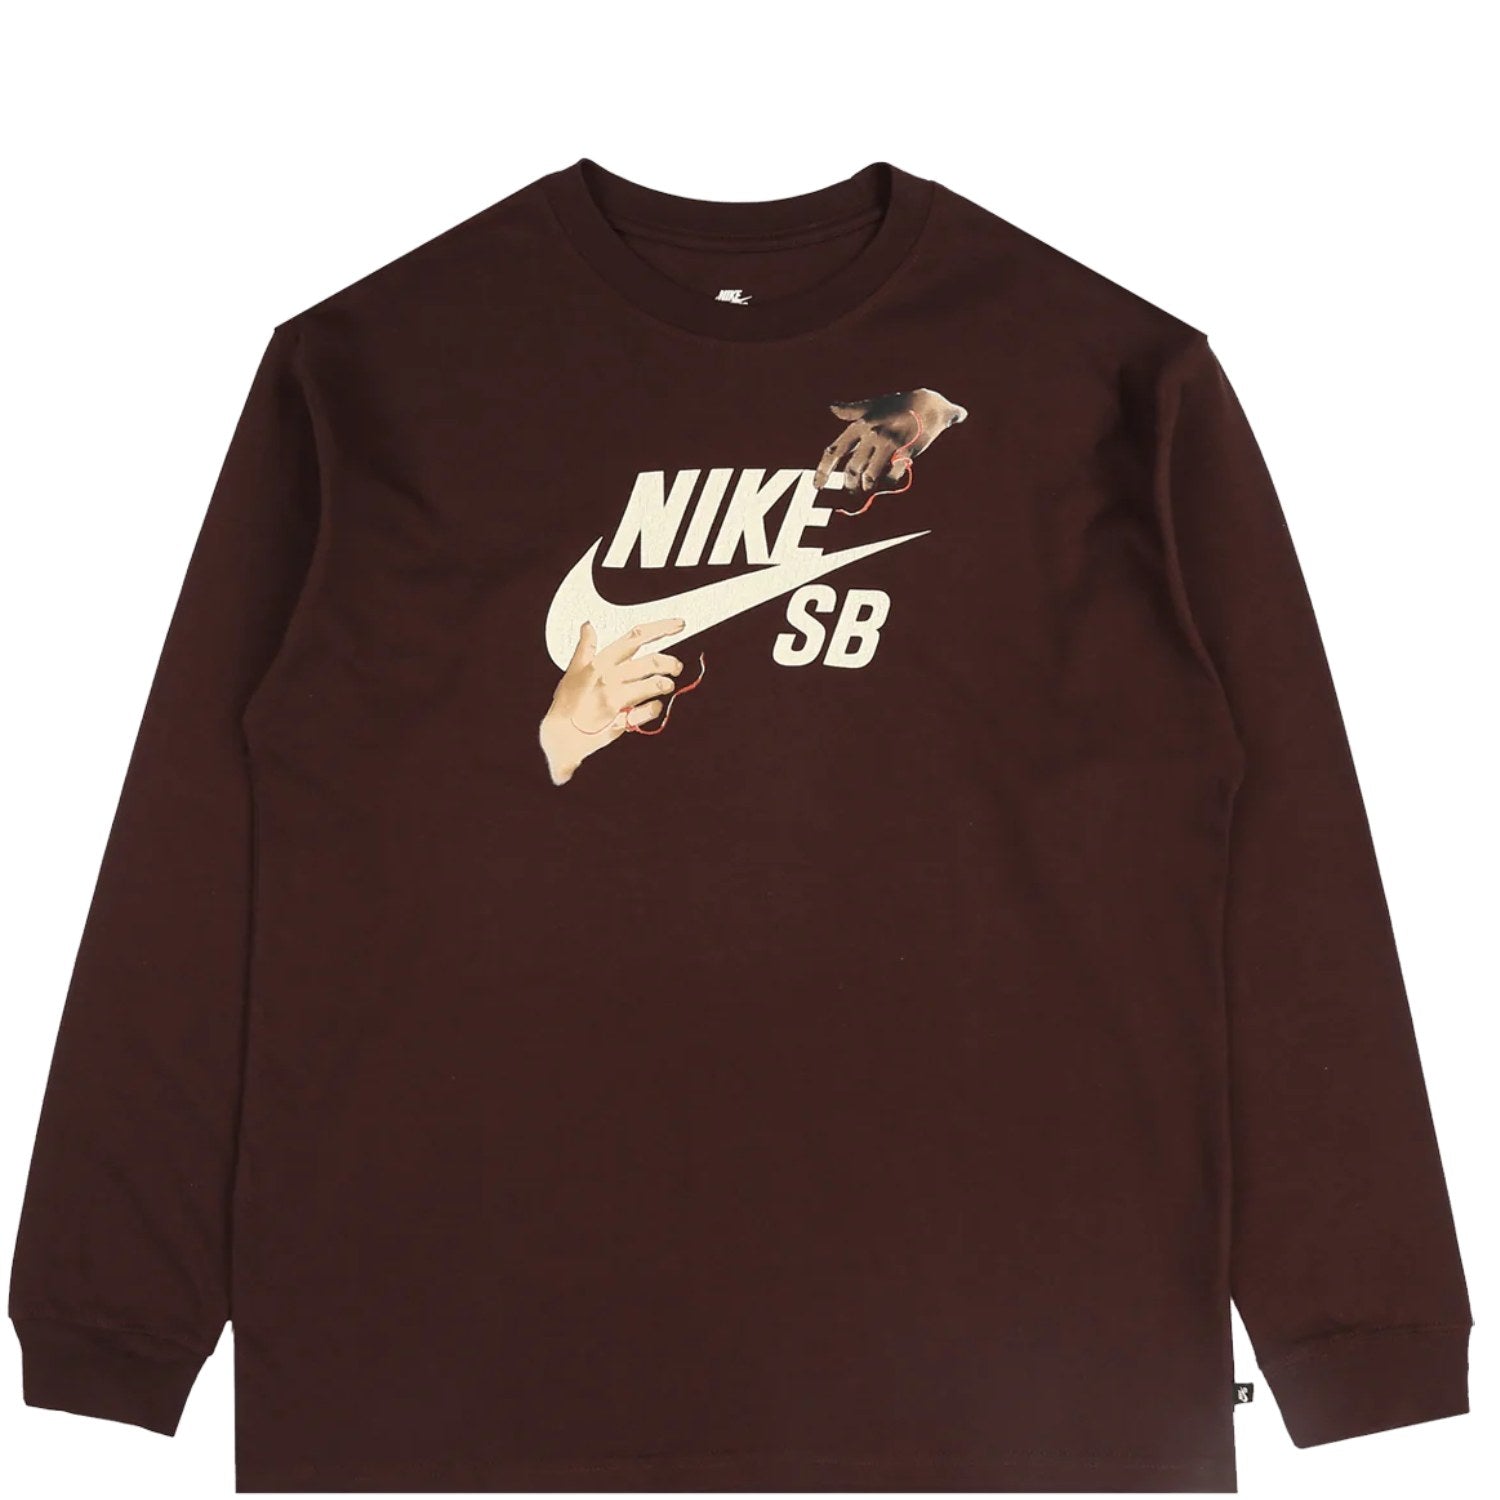 NIke SB - Long Sleeve City of Love Tee - FQ7681-227 Brown and pale yellow with cracked details on logo